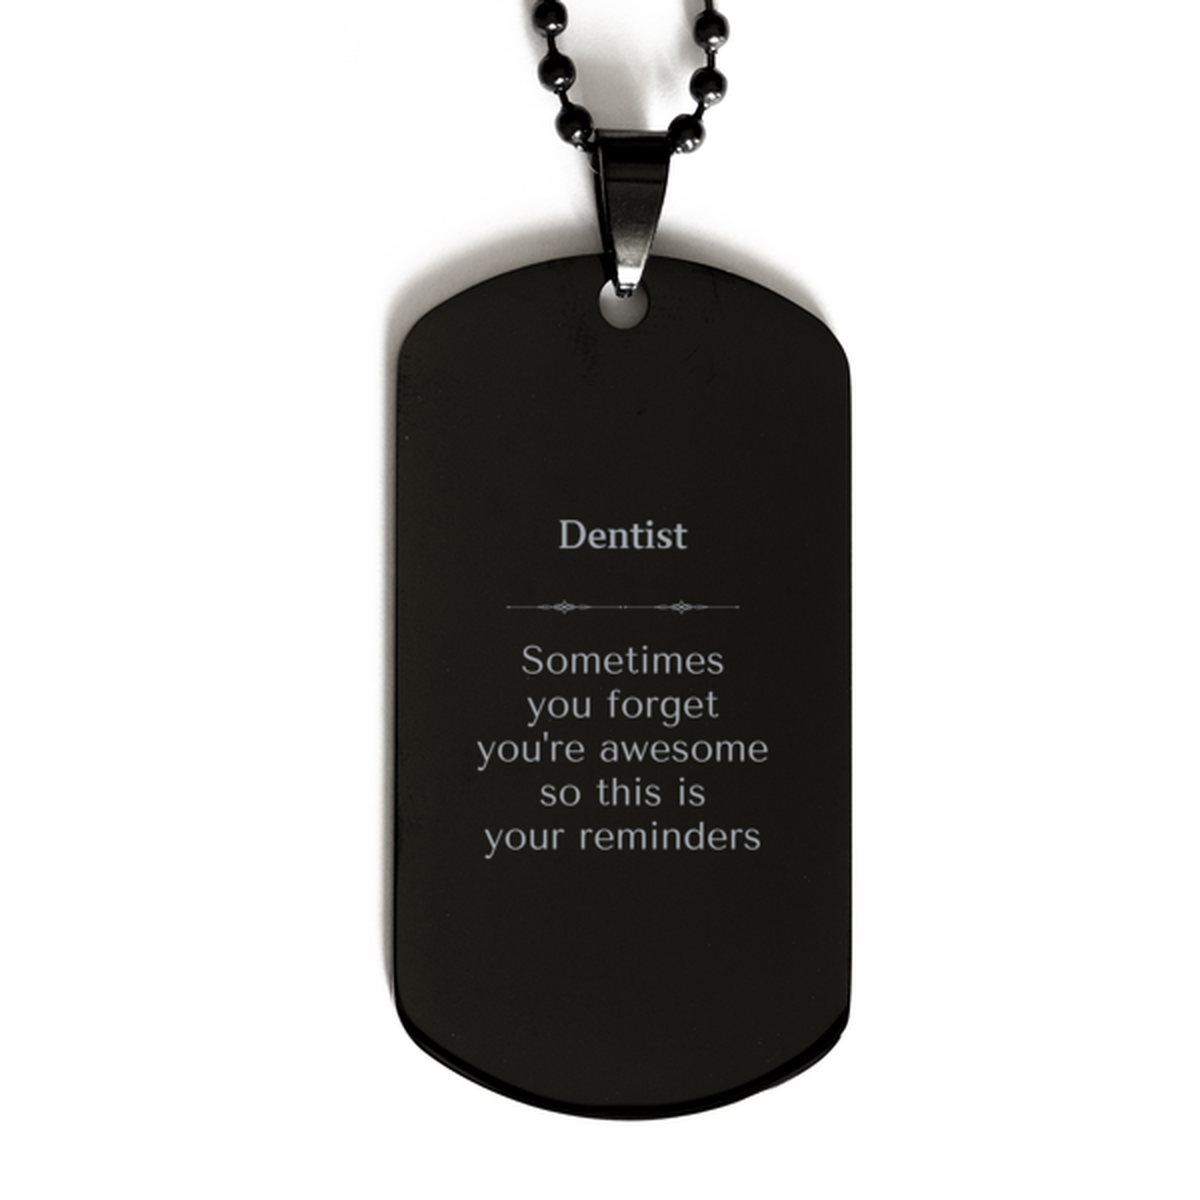 Sentimental Dentist Black Dog Tag, Dentist Sometimes you forget you're awesome so this is your reminders, Graduation Christmas Birthday Gifts for Dentist, Men, Women, Coworkers